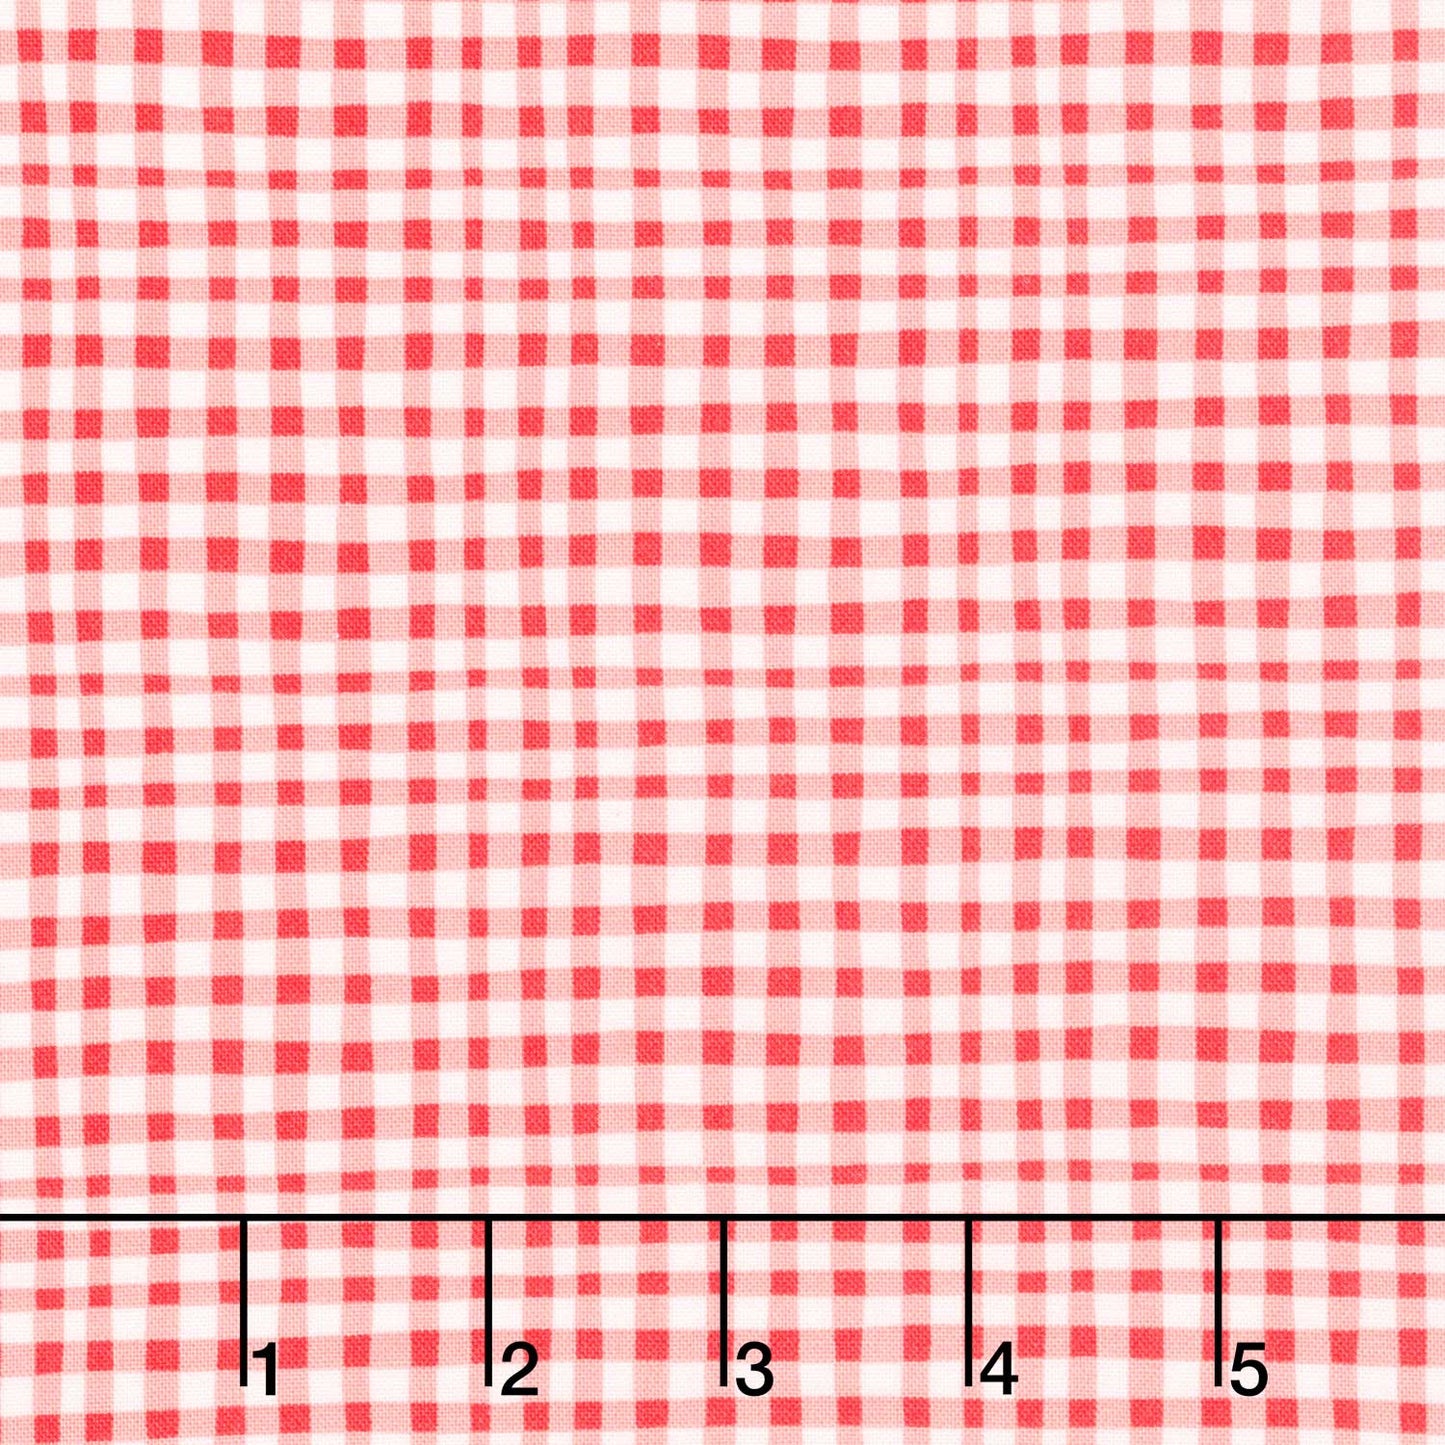 Family Fun Day - Gingham Play Clementine Yardage Primary Image